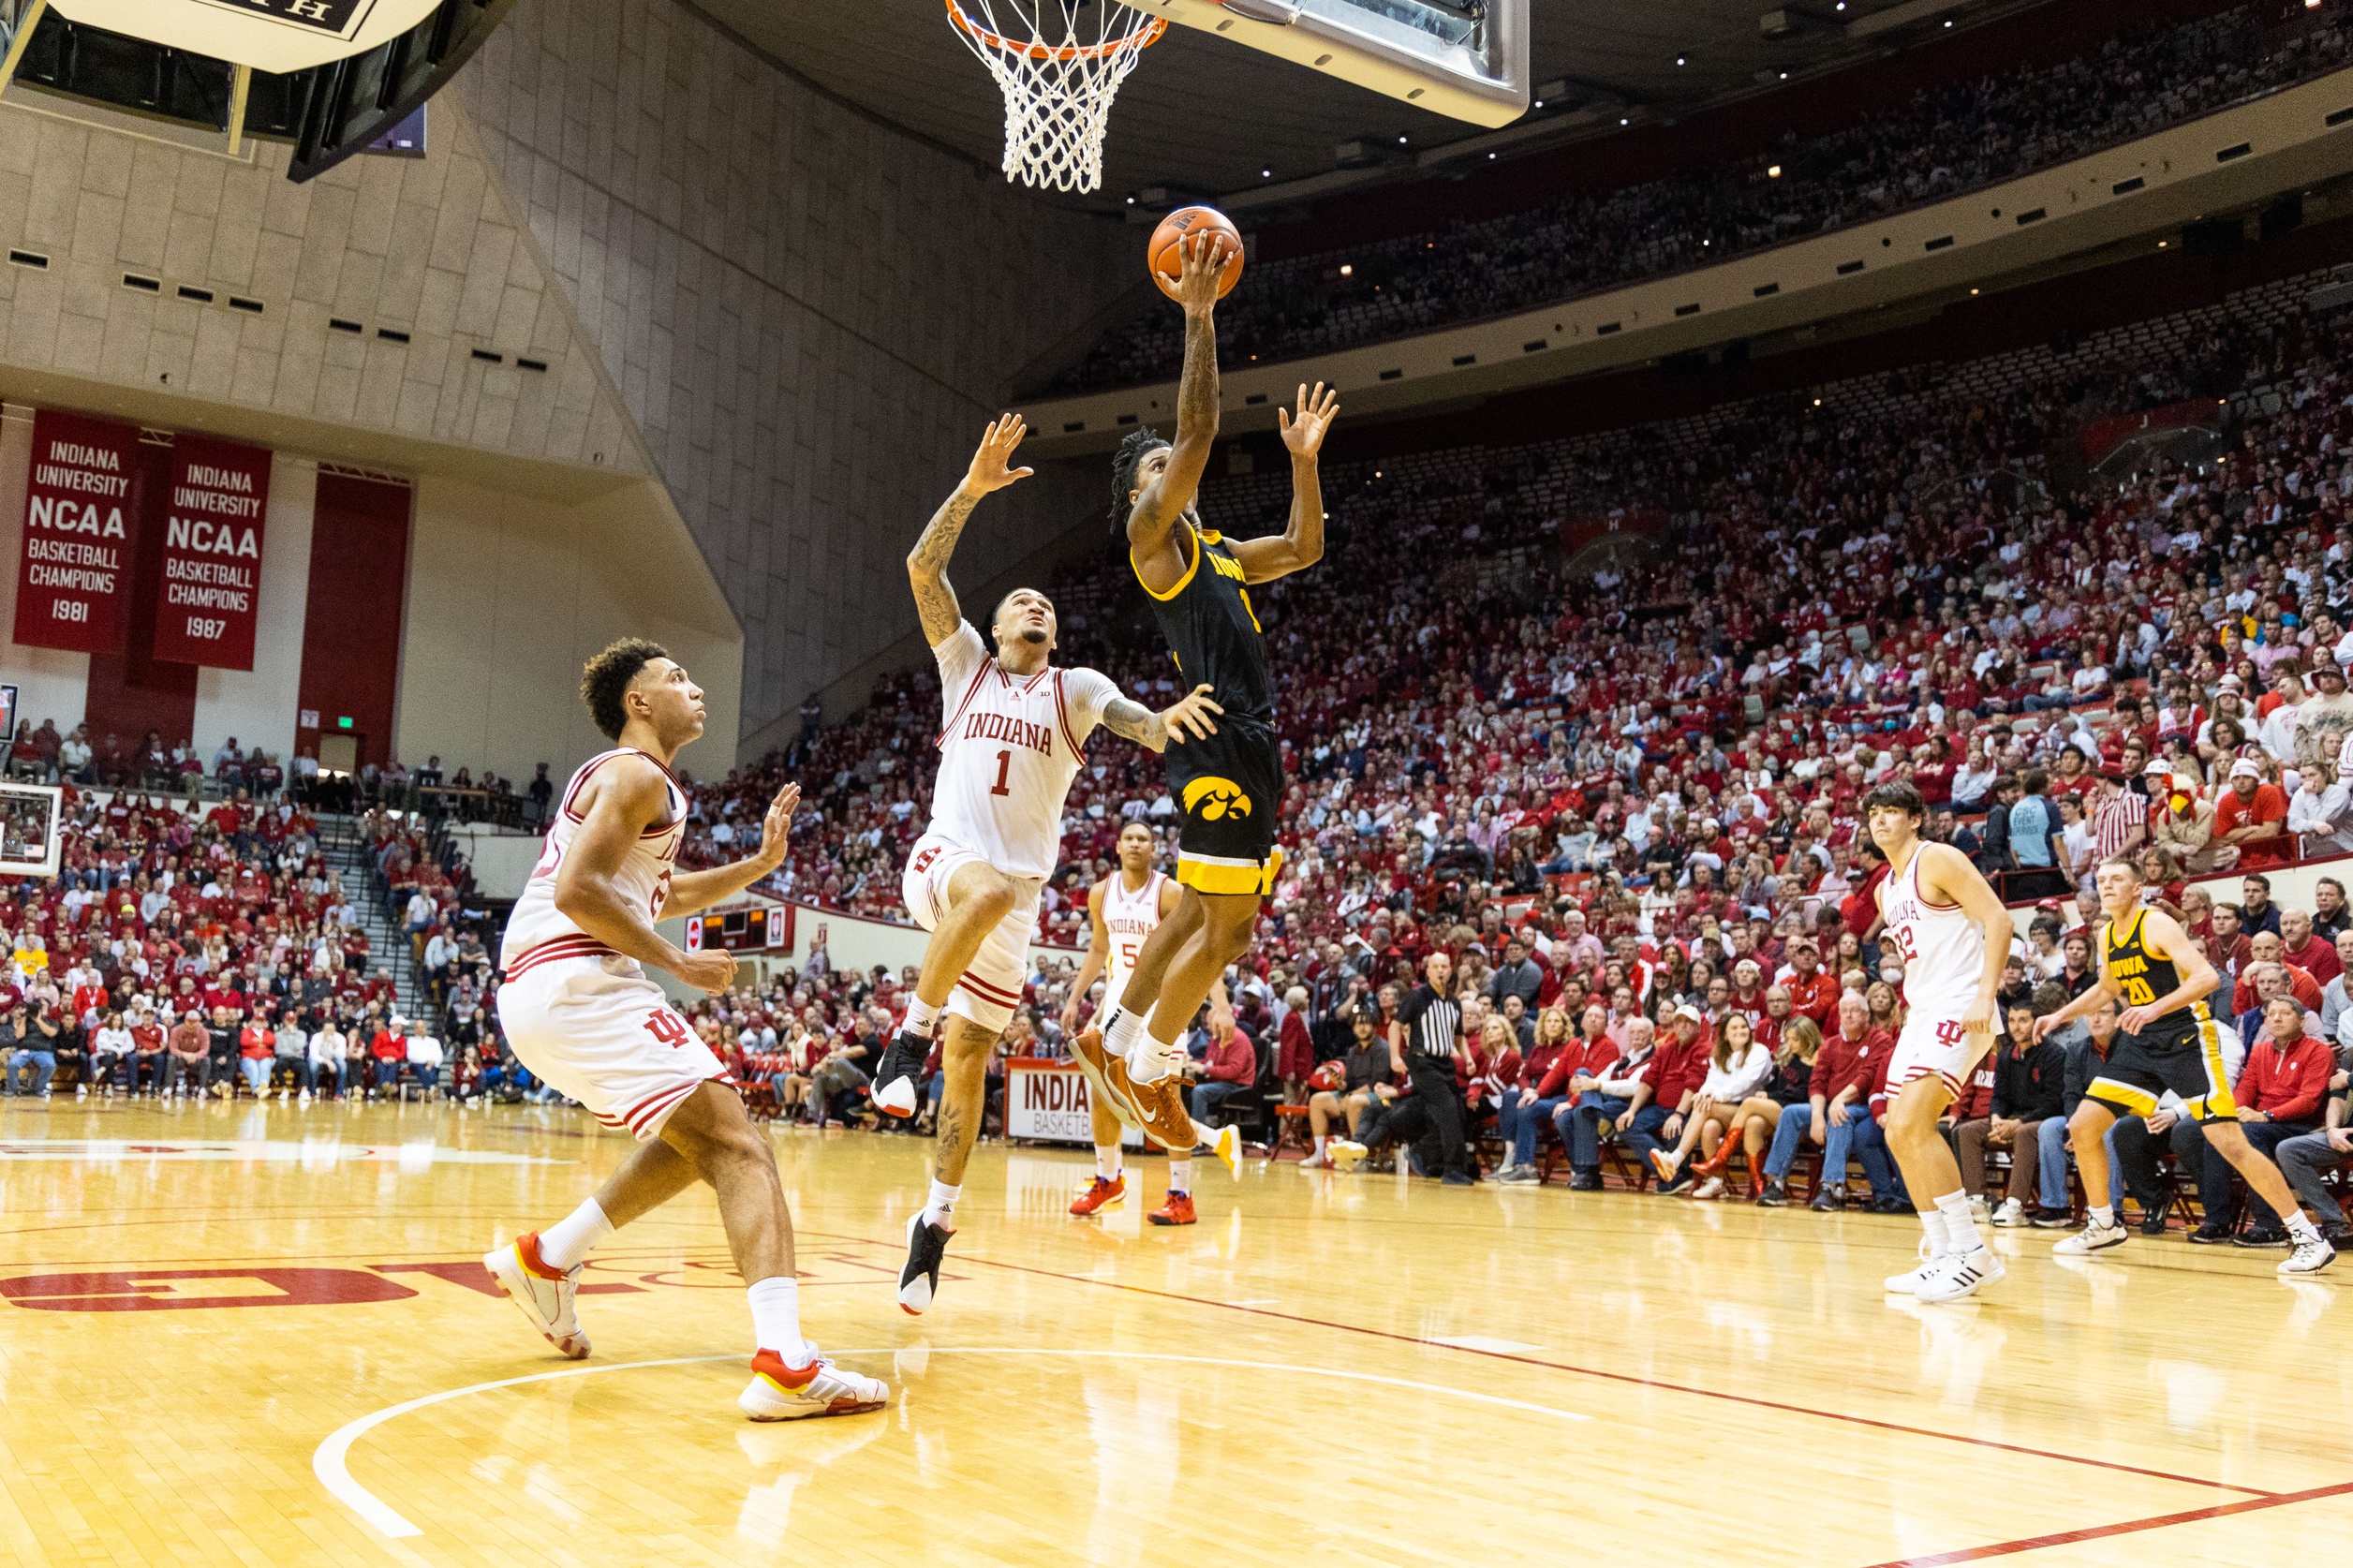 Iowa Hawkeyes guard Ahron Ulis (1) shoots the ball while Indiana Hoosiers guard Jalen Hood-Schifino (1) defends in the second half at Simon Skjodt Assembly Hall.